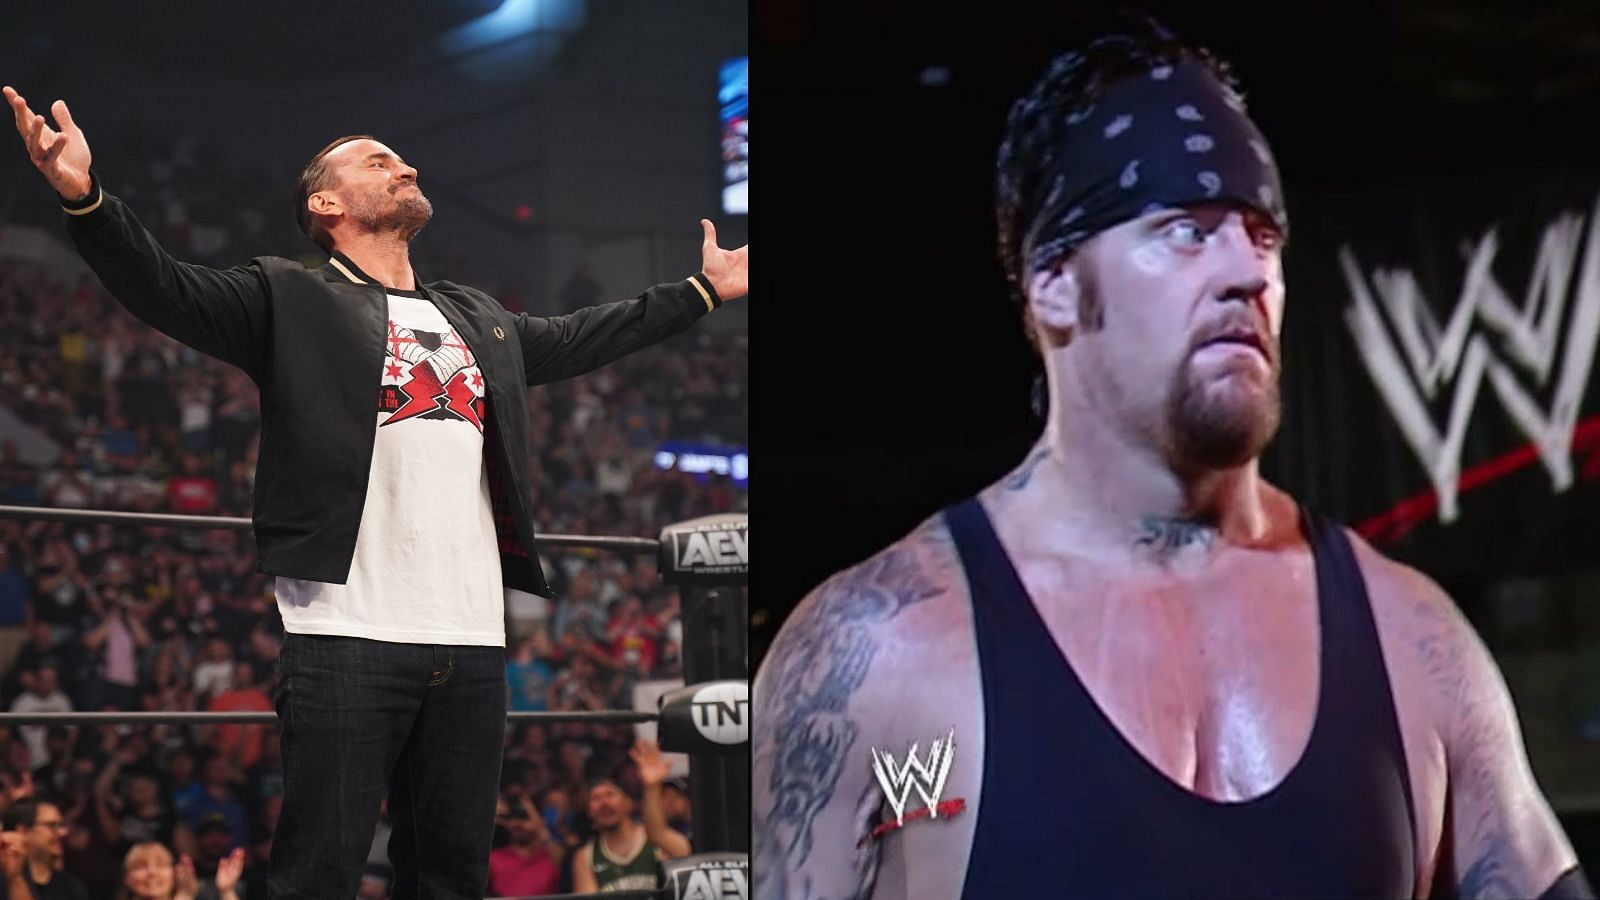 The Undertaker had many memorable moments in his career.